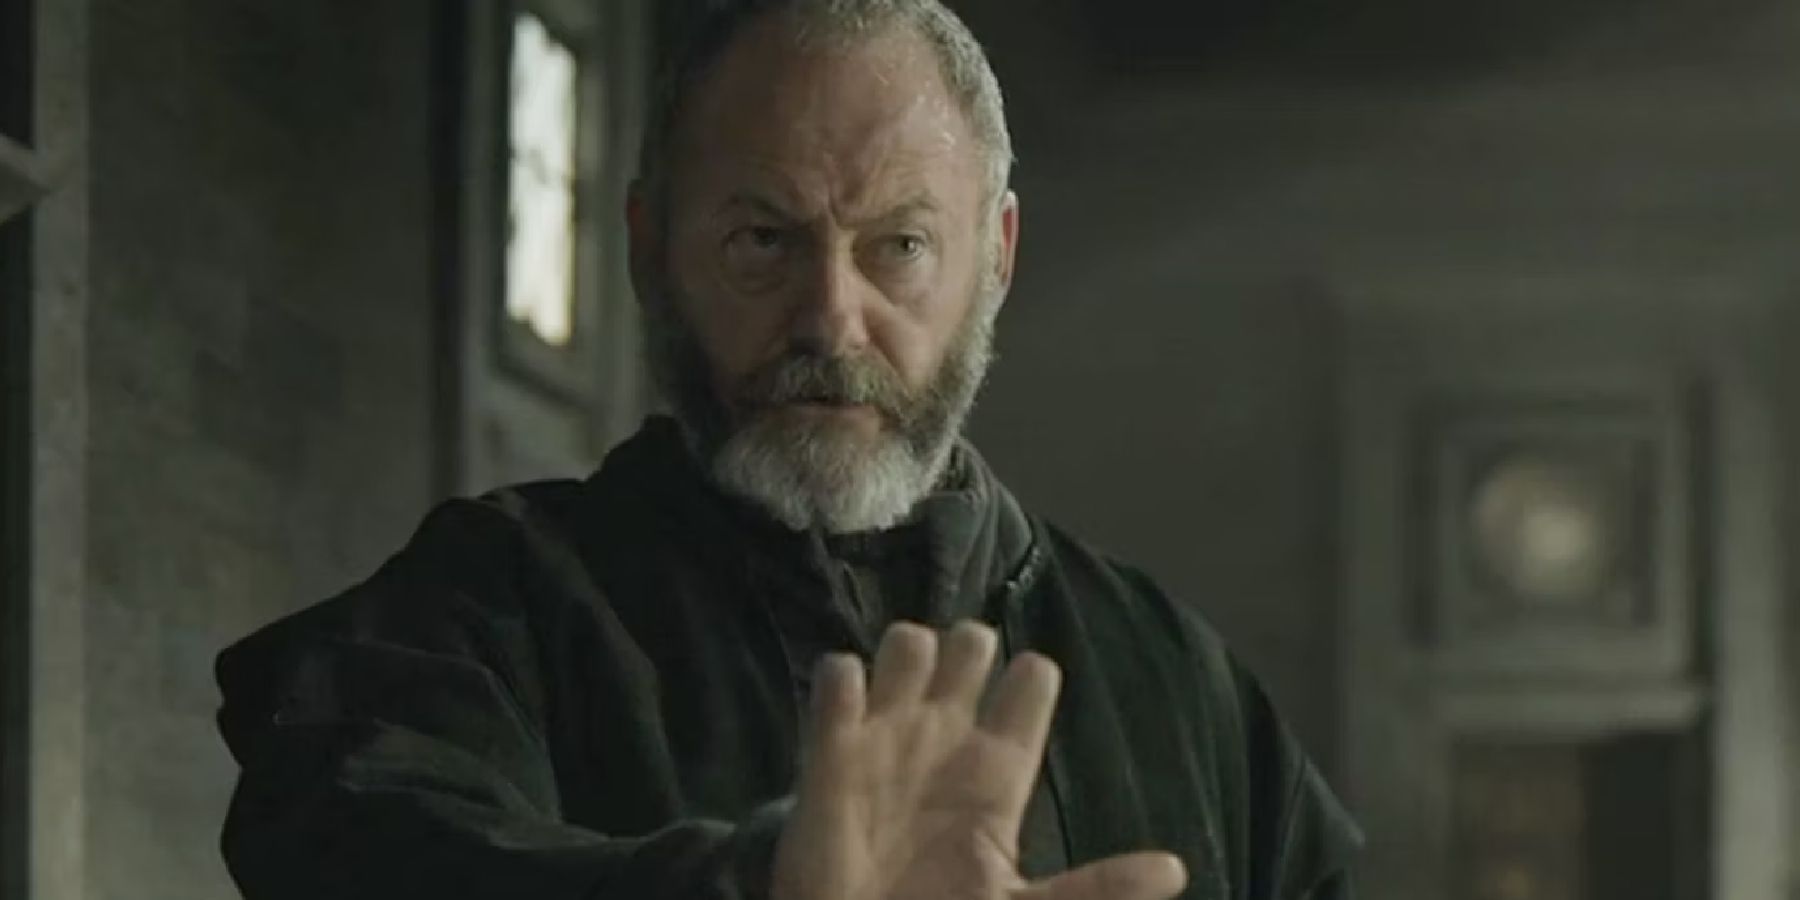 Davos Seaworth without fingertips